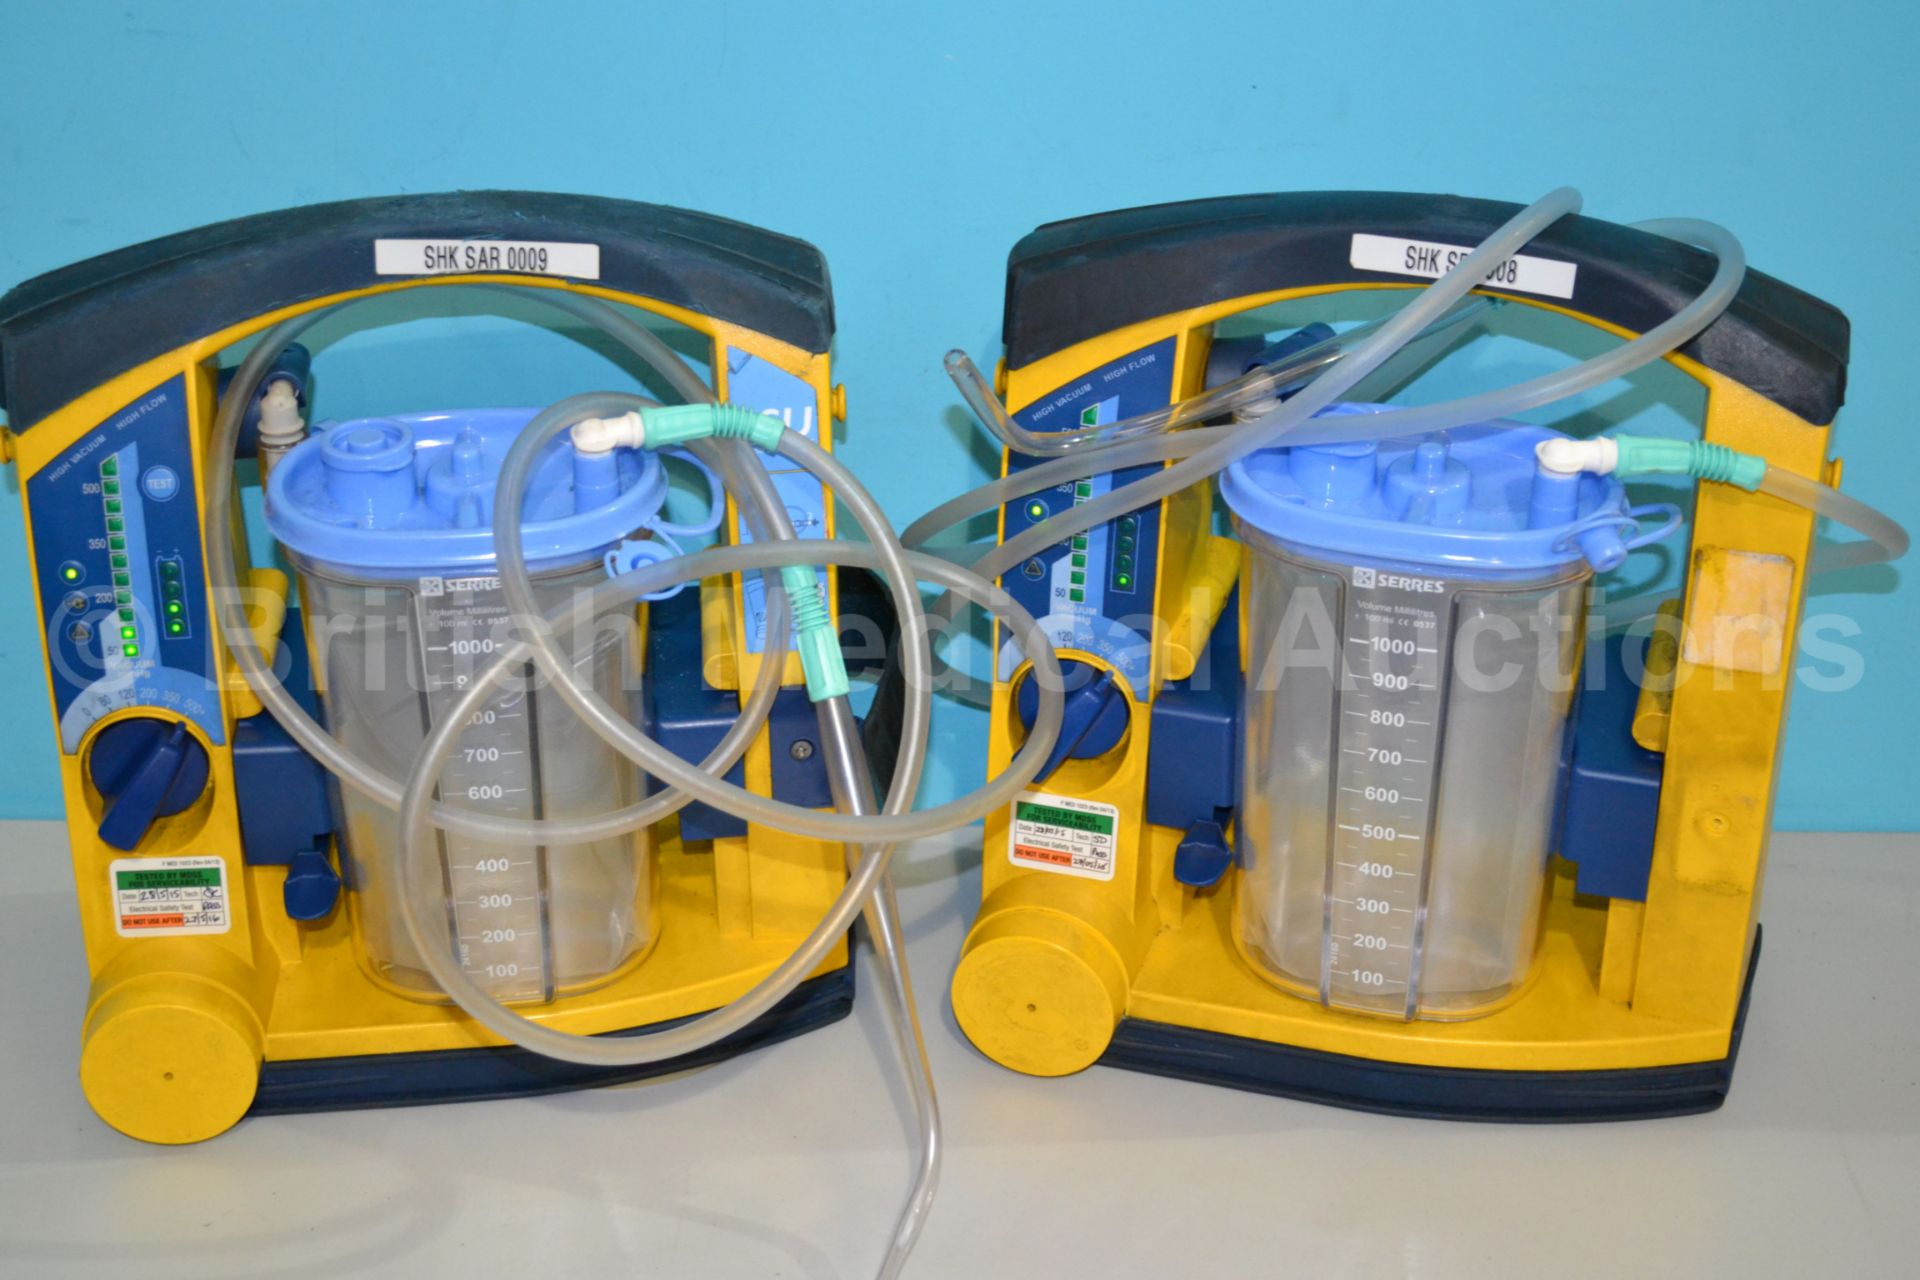 2 x Laerdal Suction Units with Cups and Hoses (Bot